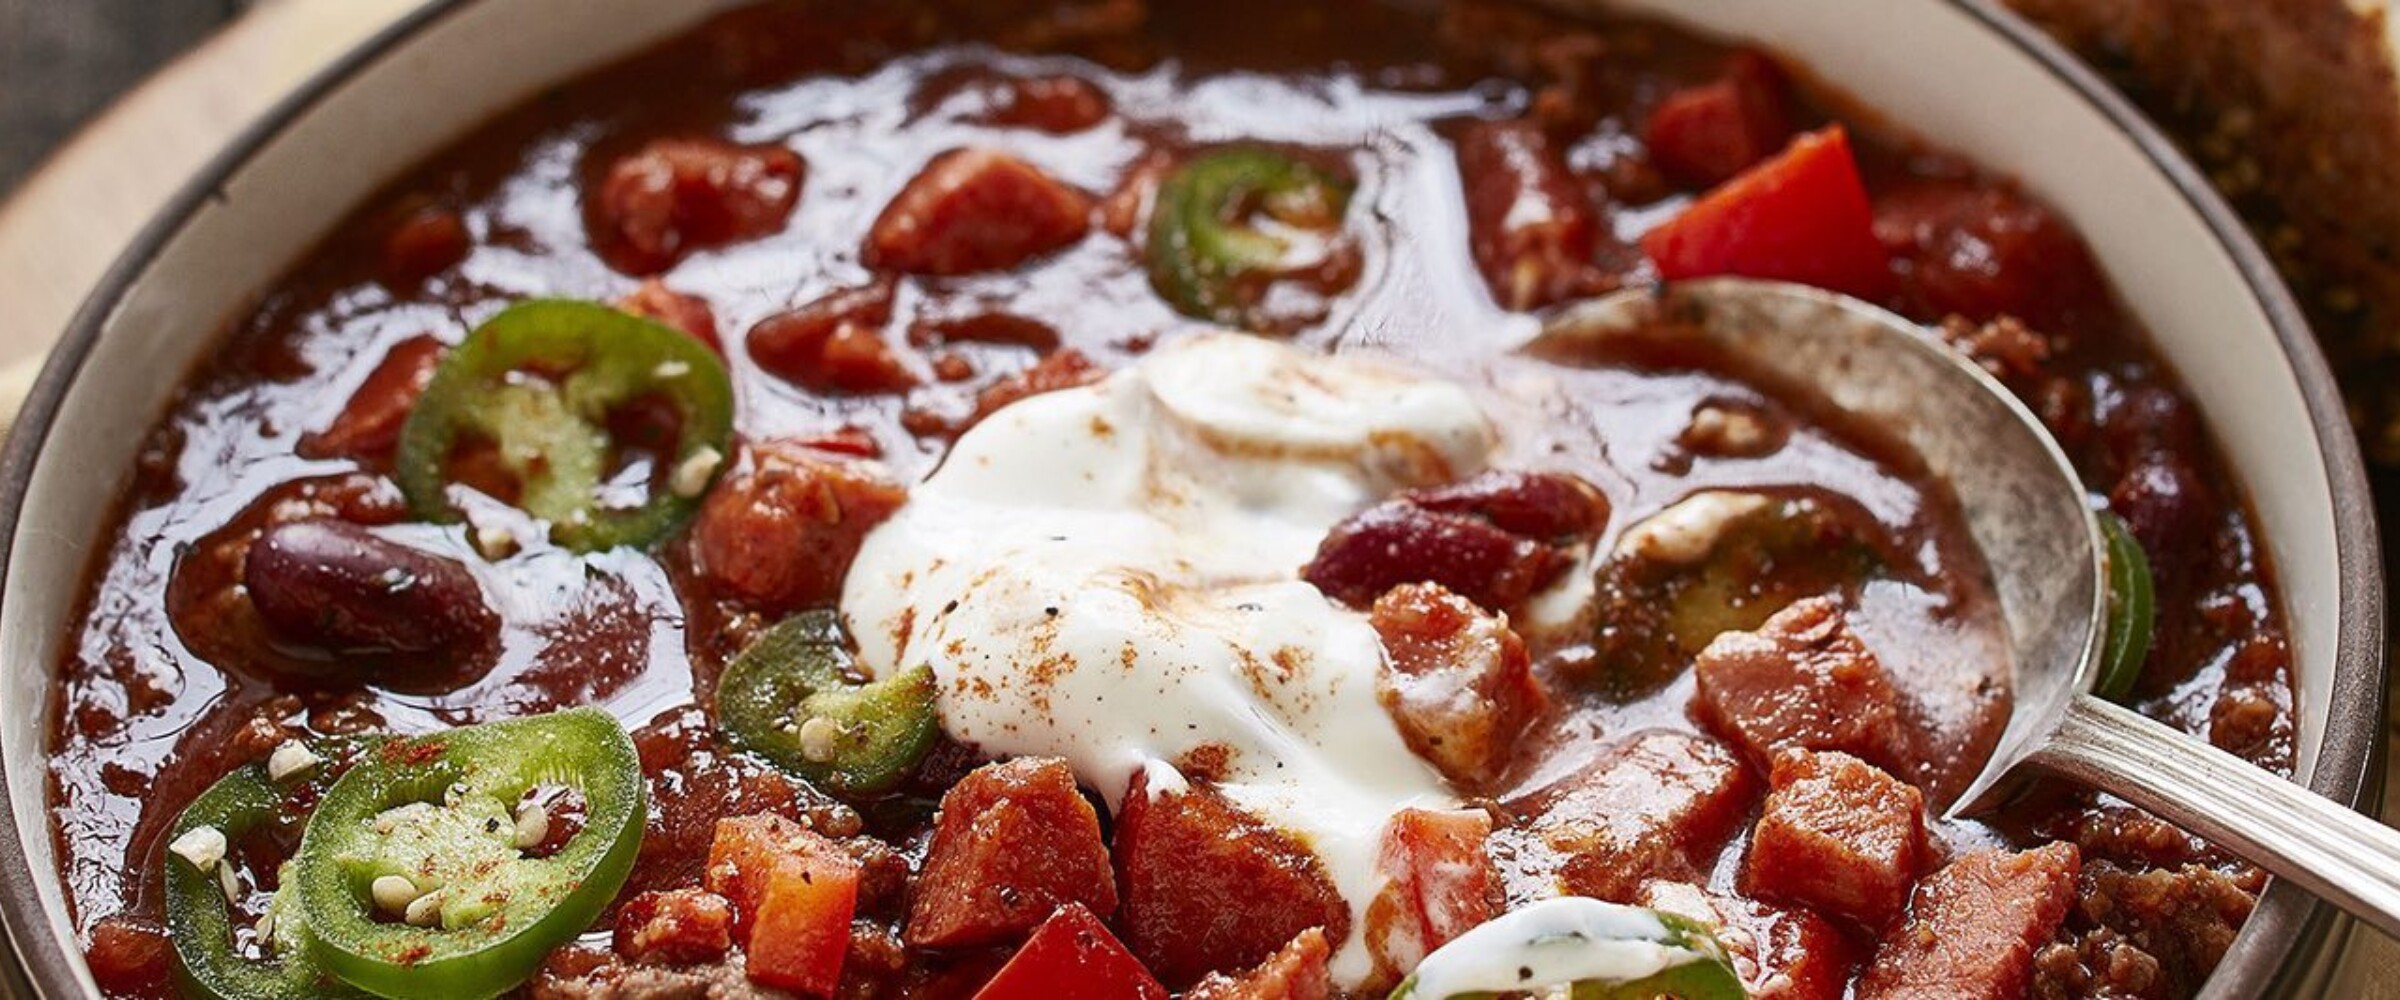 Chorizo and beef chilli with sour cream on top in a bowl